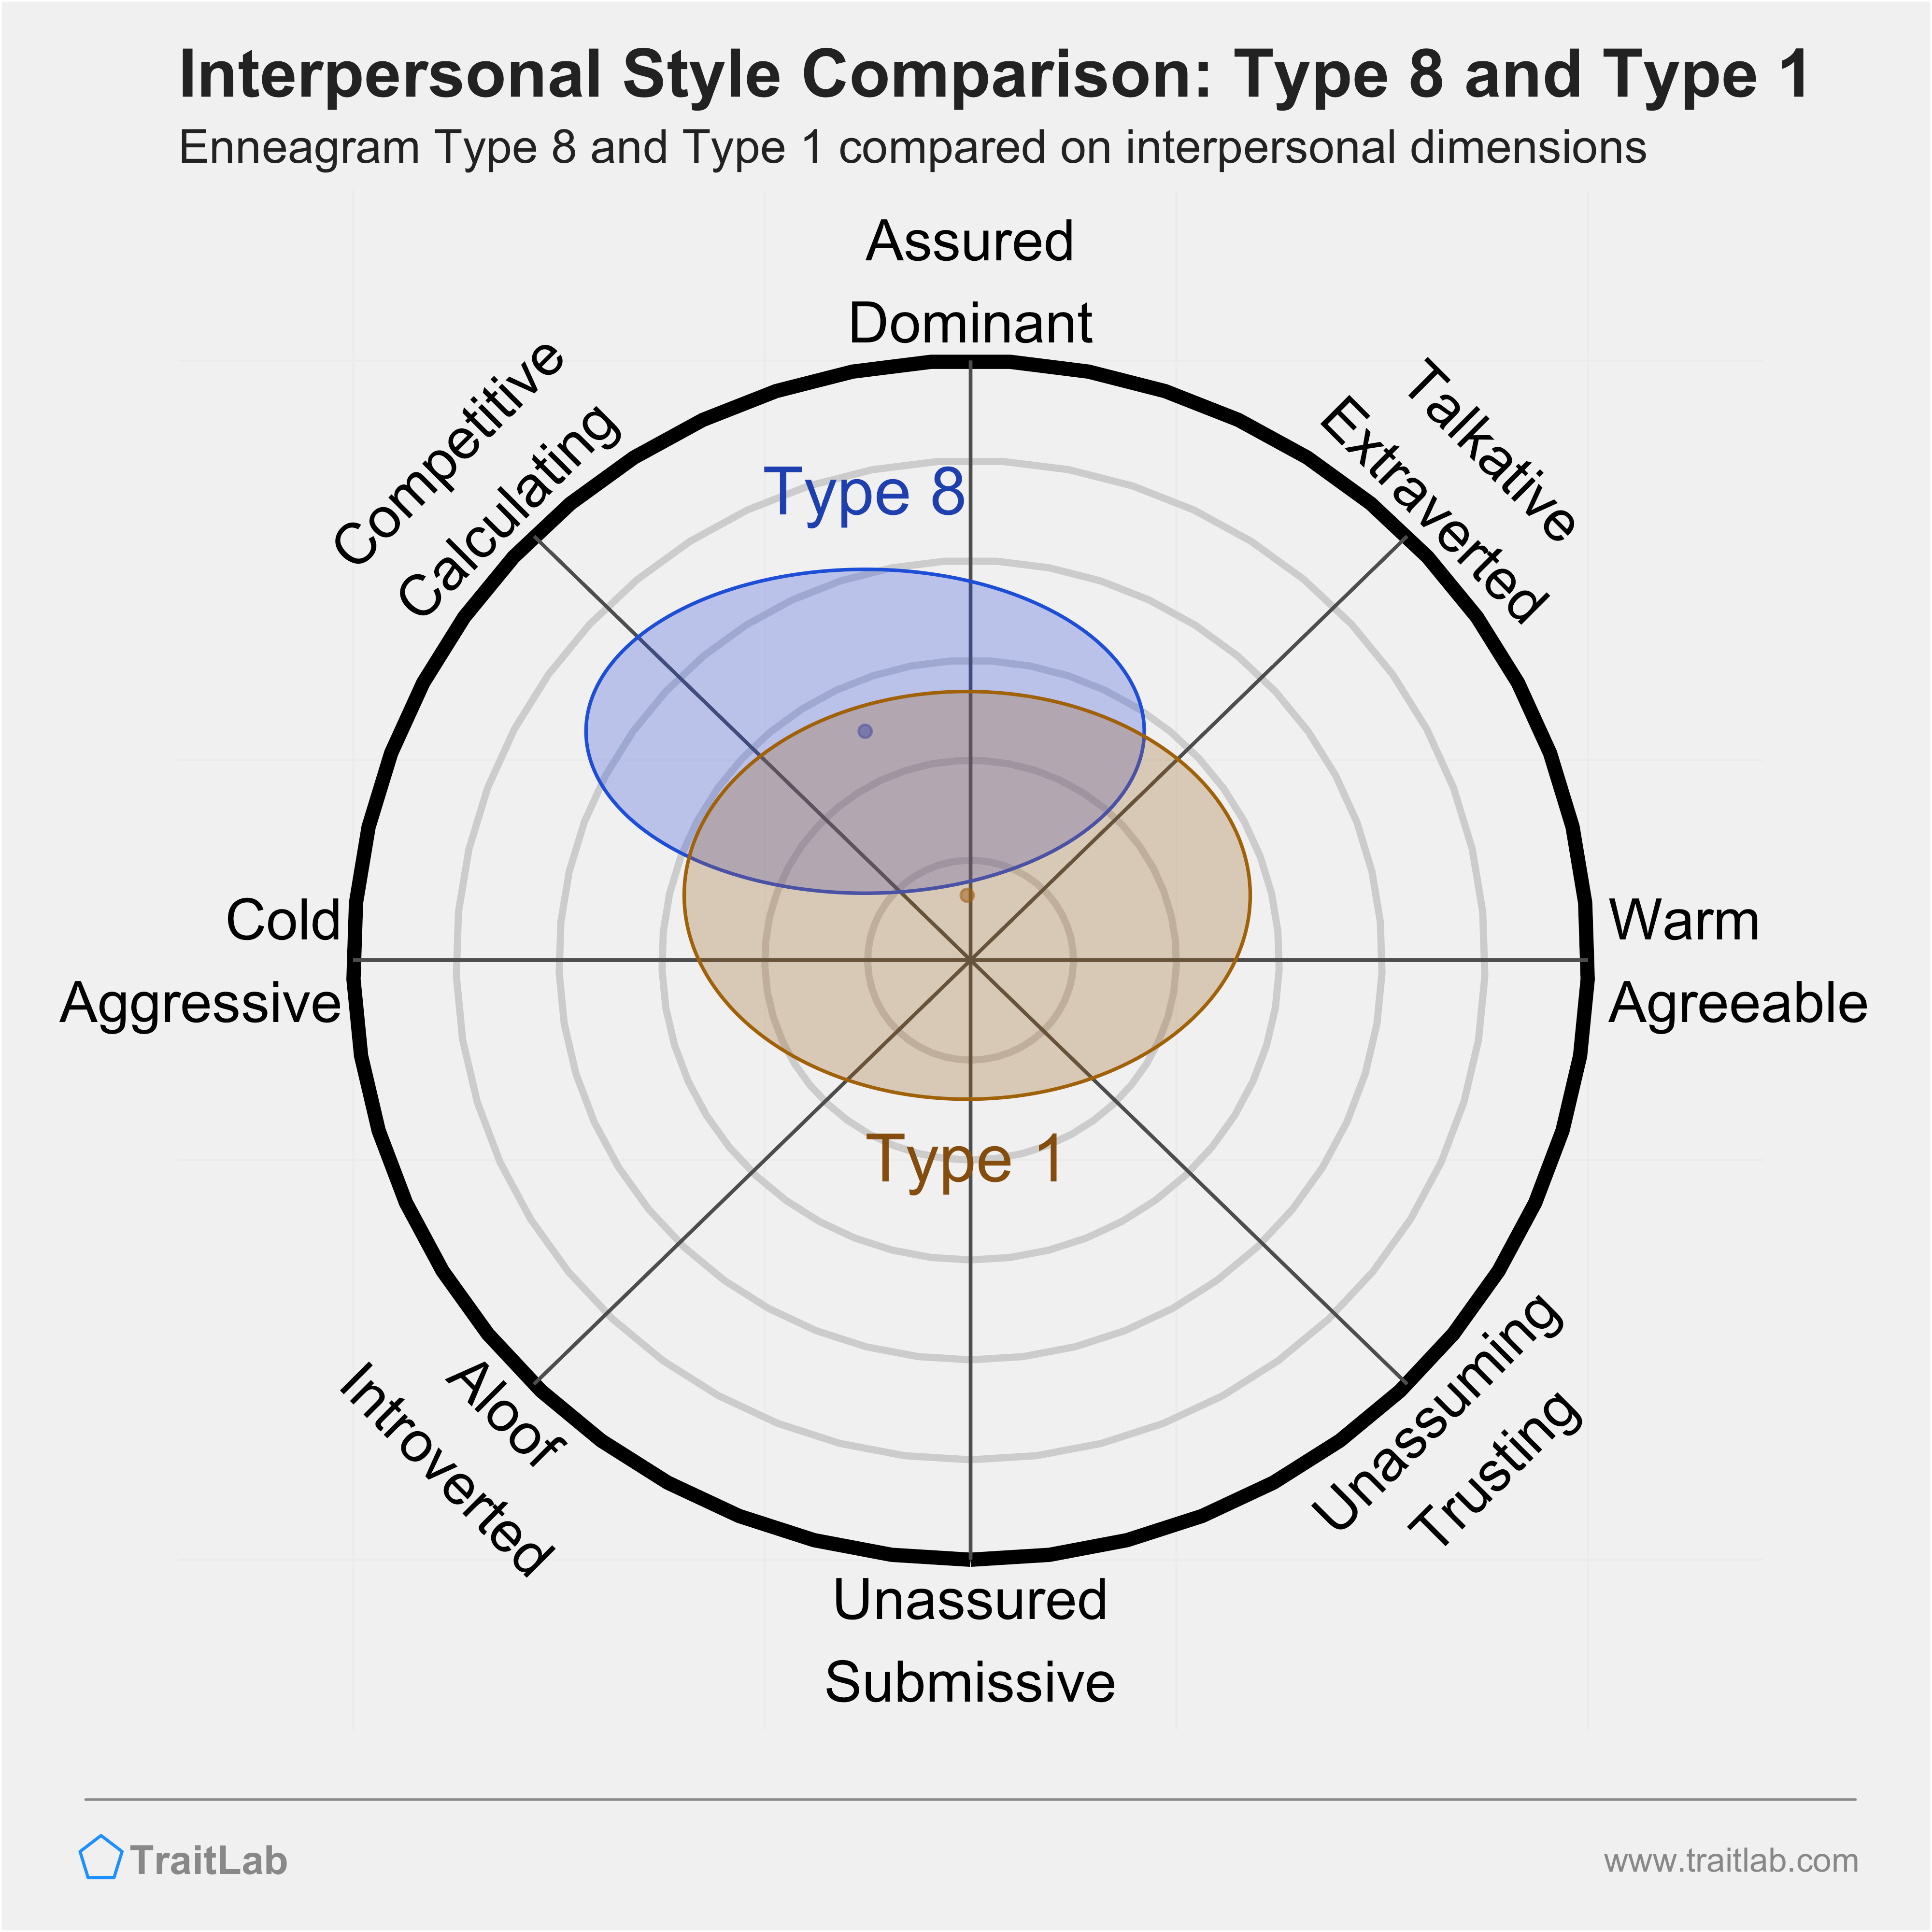 Enneagram Type 8 and Type 1 comparison across interpersonal dimensions